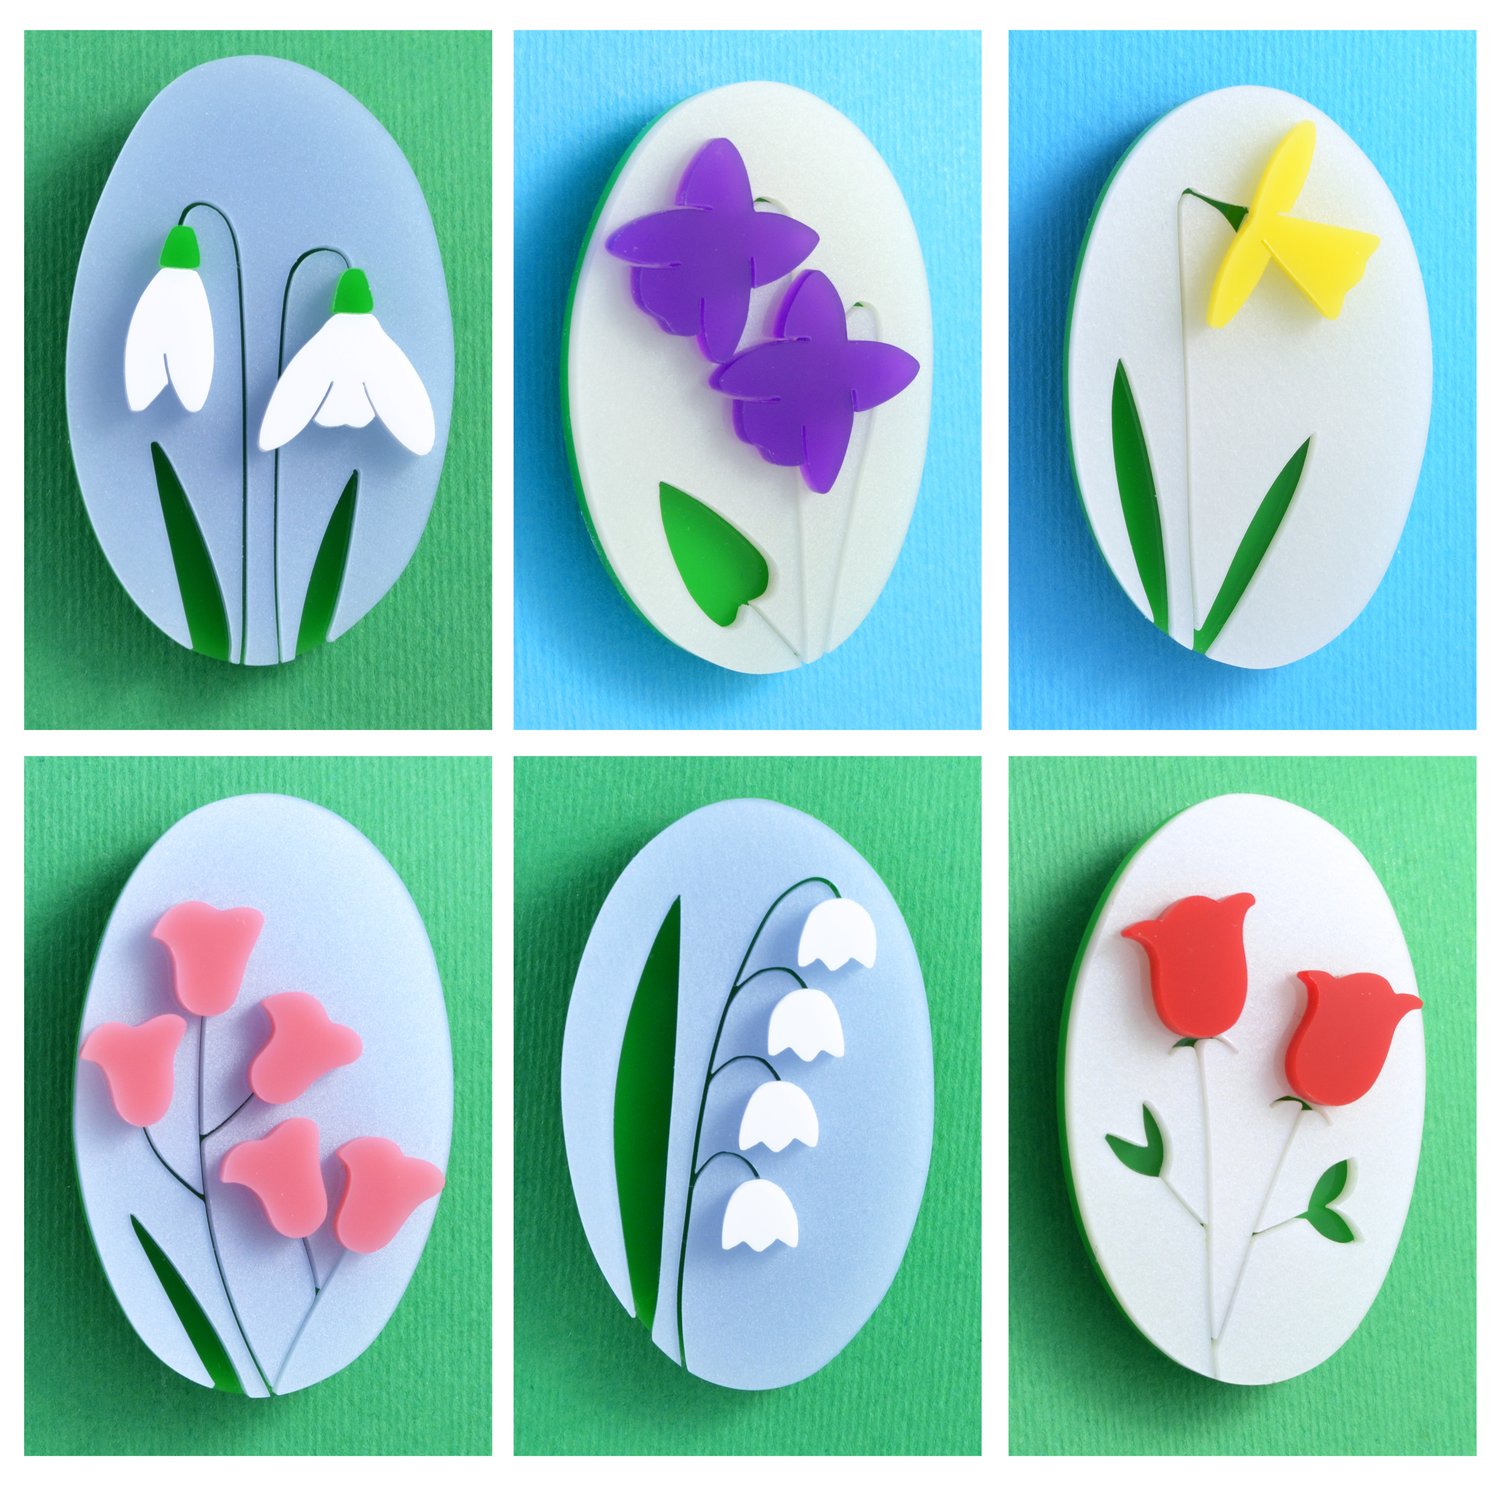 Image of Months and Meanings Flower brooches (January to June)